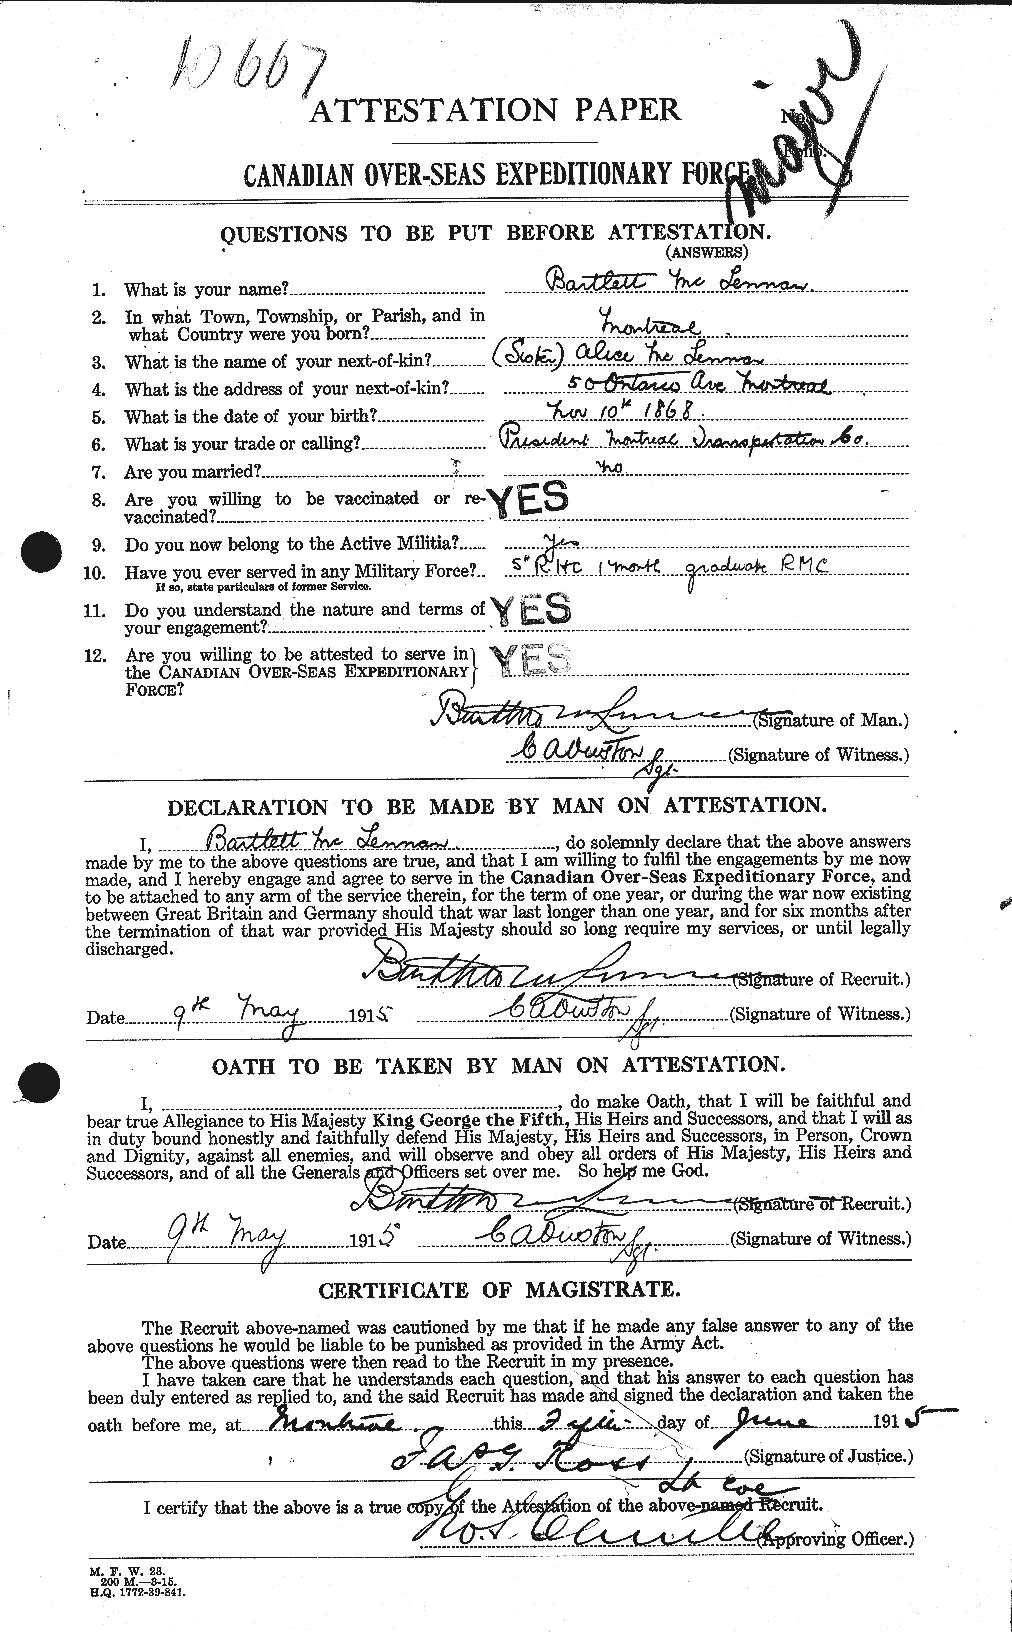 Personnel Records of the First World War - CEF 534427a